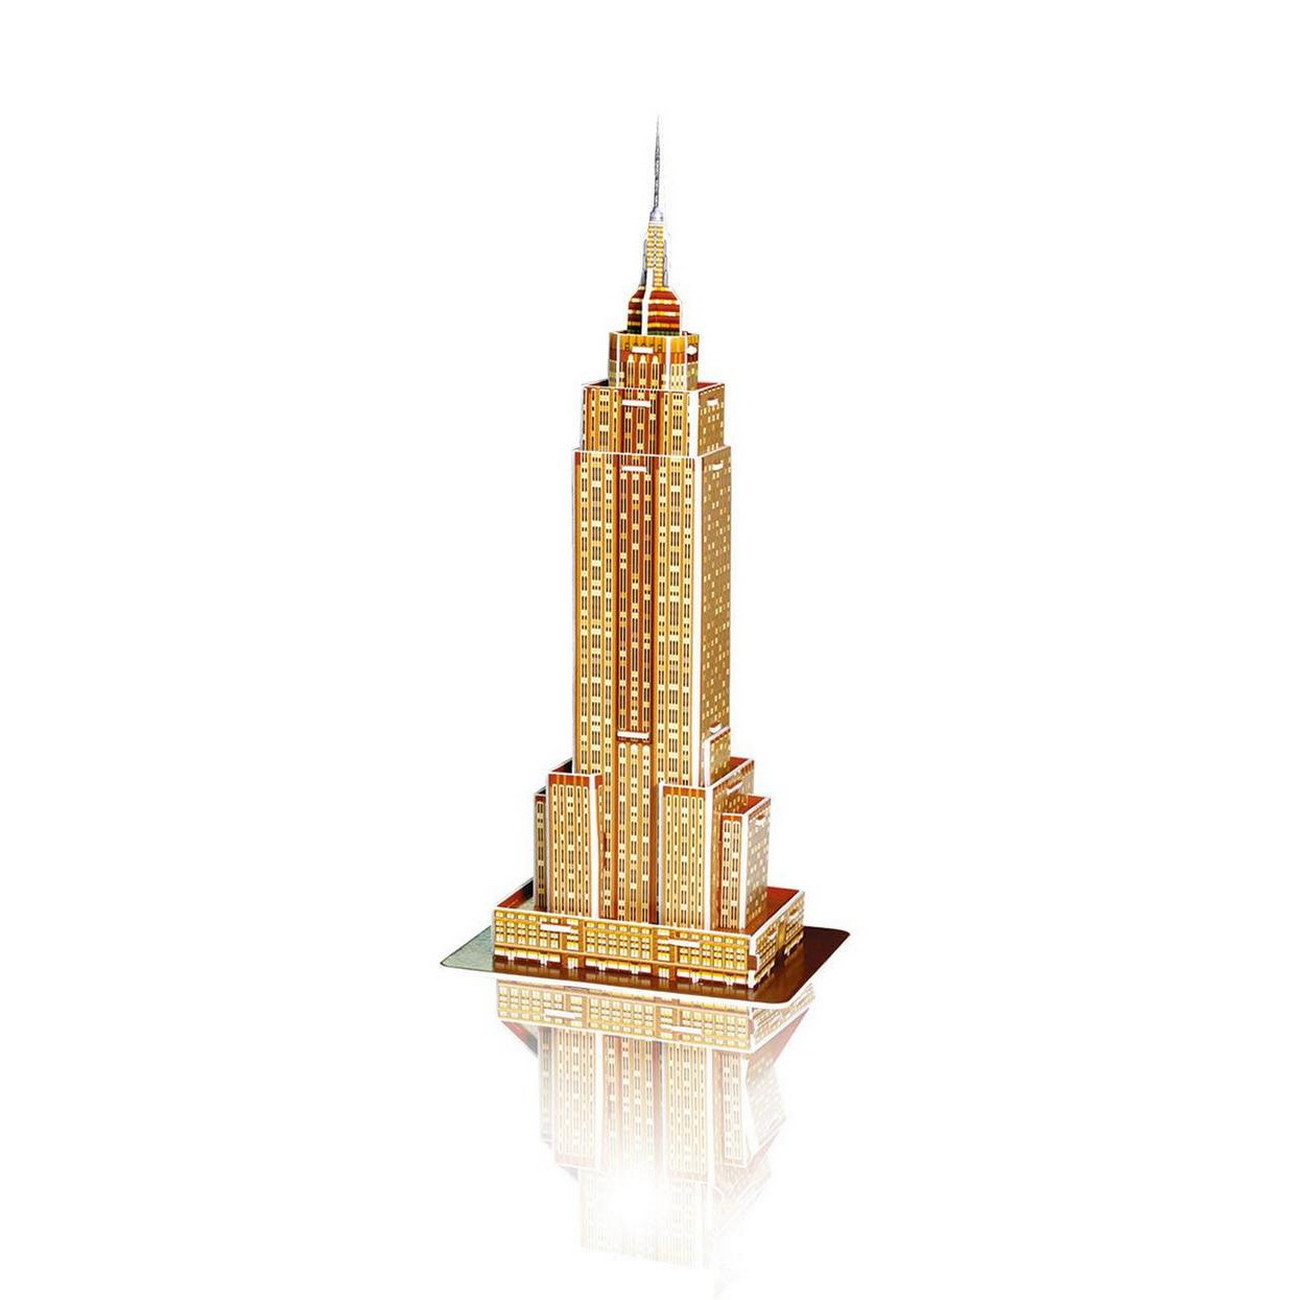 Revell 00119 - Empire State Building - 3D Puzzle